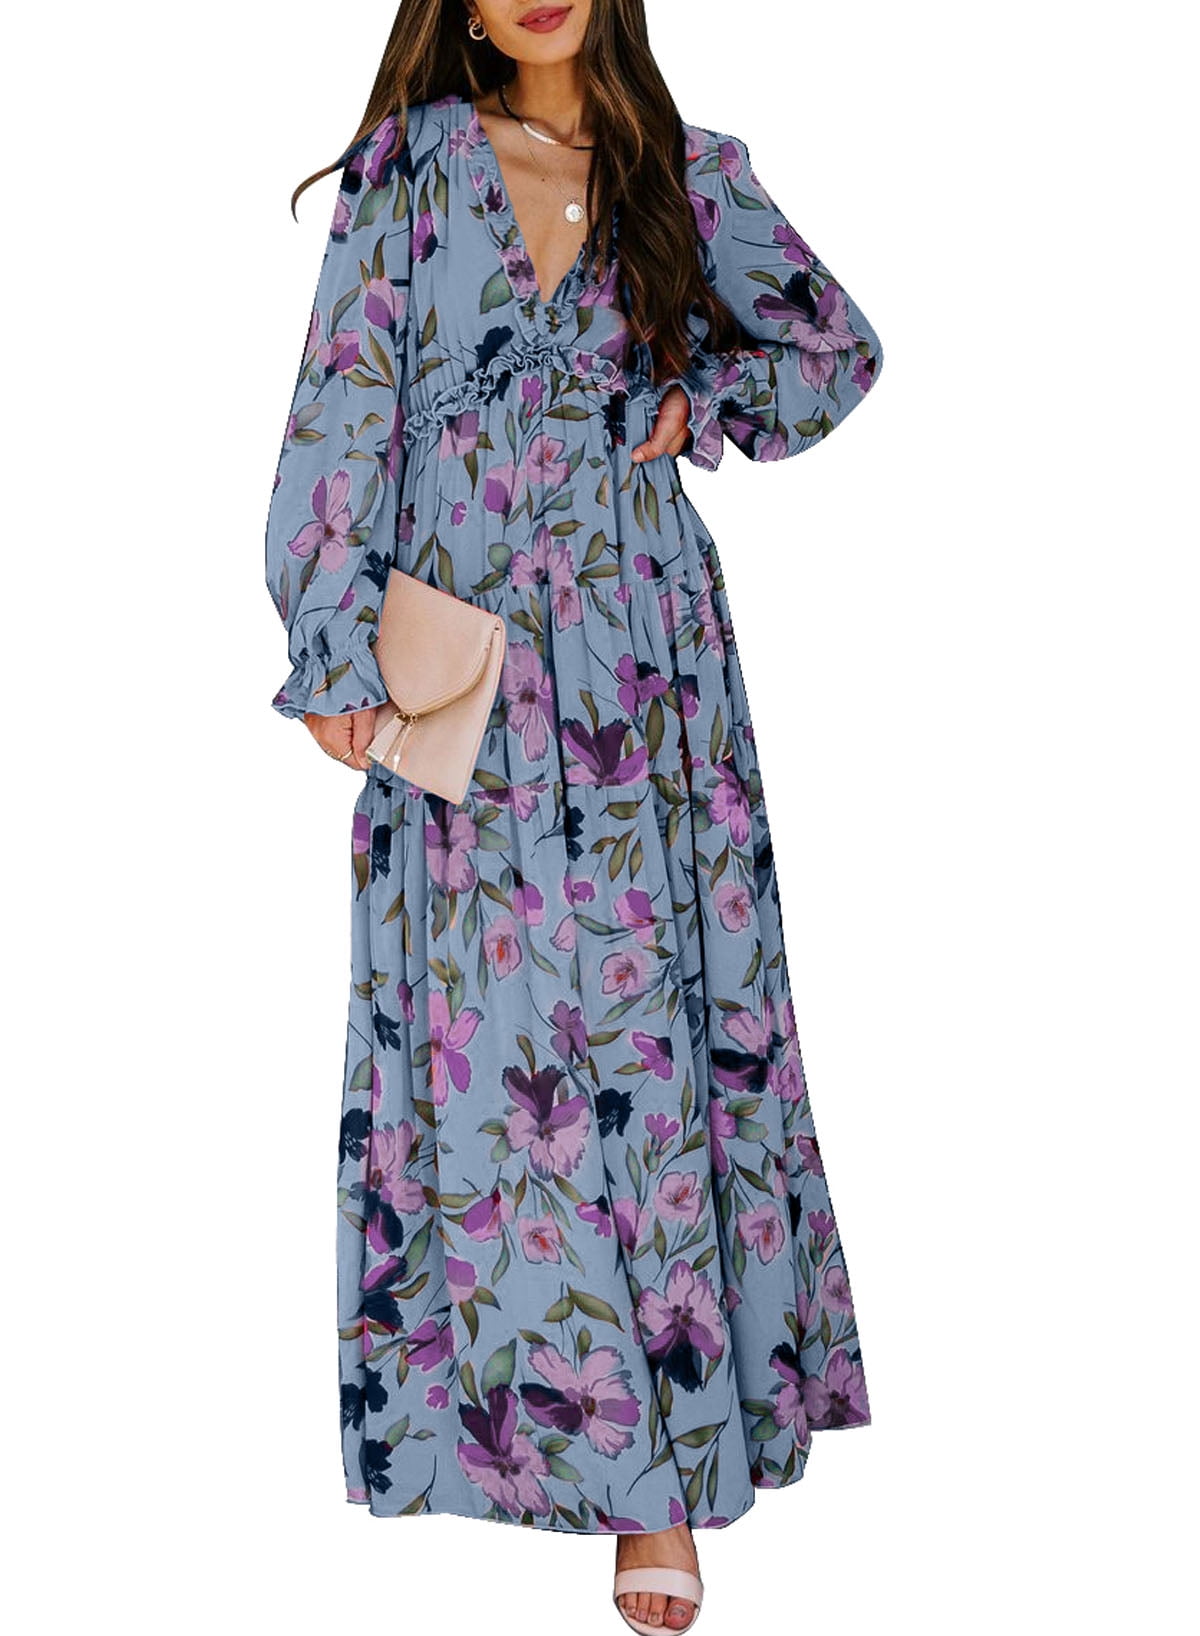 Dokotoo Women's Sky Blue Floral Maxi Dresses Casual Deep V Neck Long Sleeve Evening Dress Cocktail Party Dress for Women, US 16-18(XL) - image 1 of 8